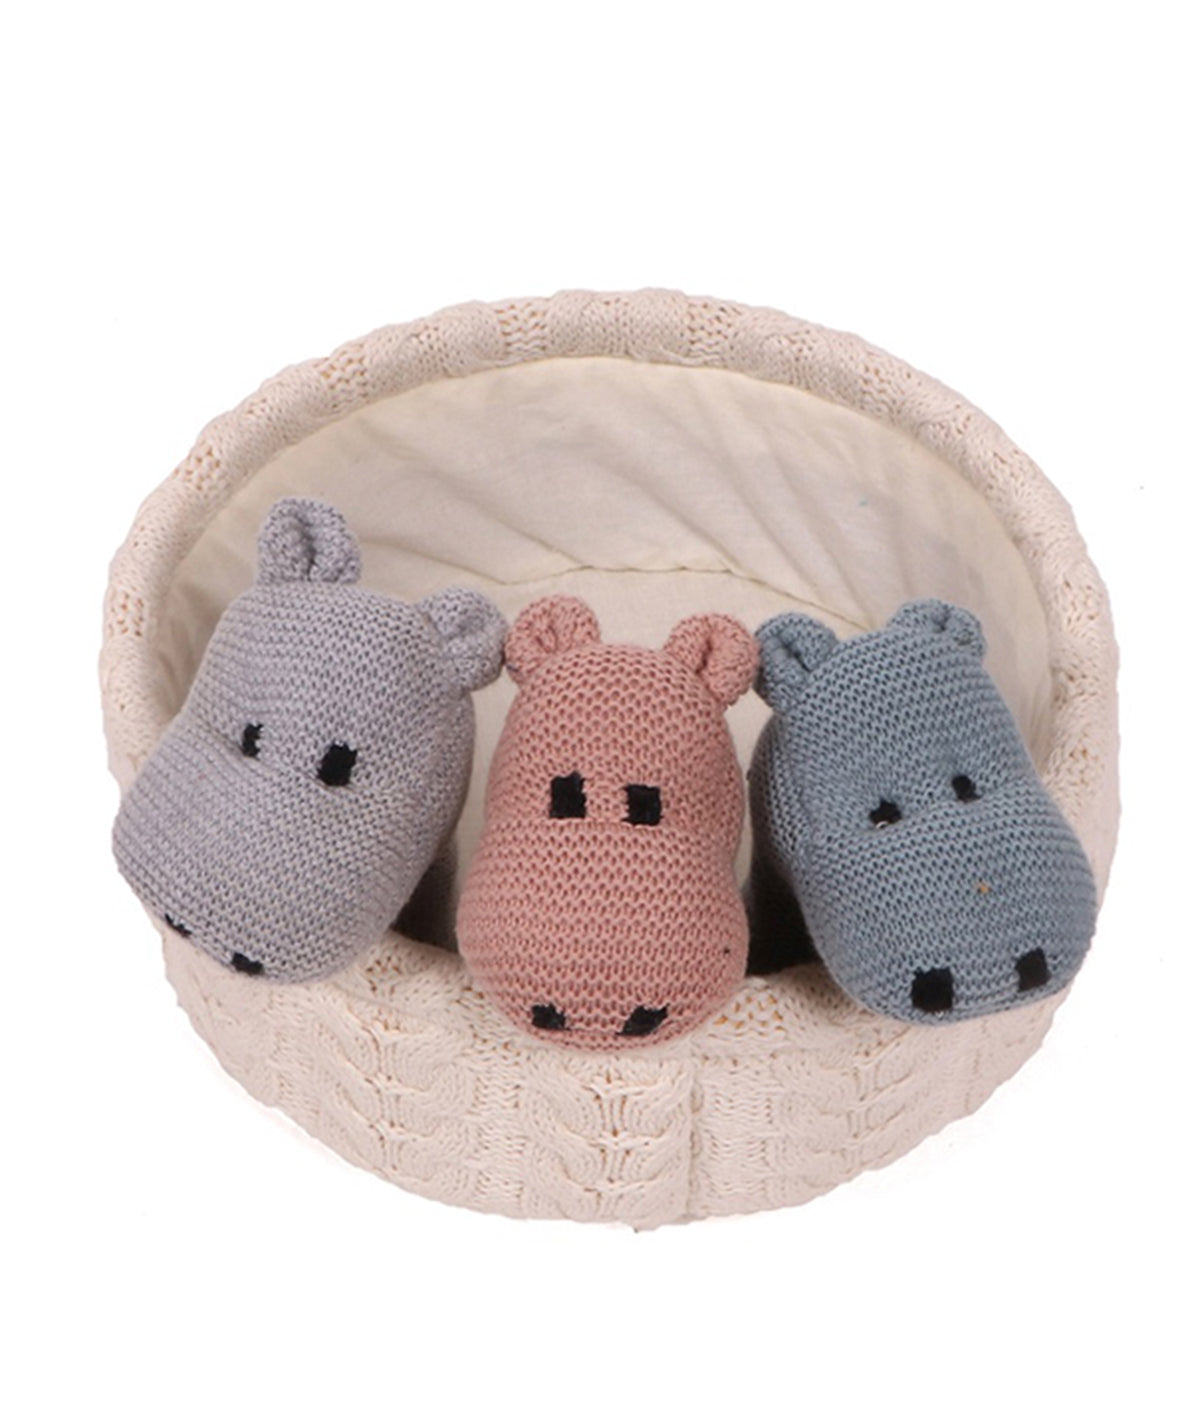 Rattle Hippo Mineral Blue Colour Cotton Knitted Stuffed / Plush / Soft Toy for Babies and Kids